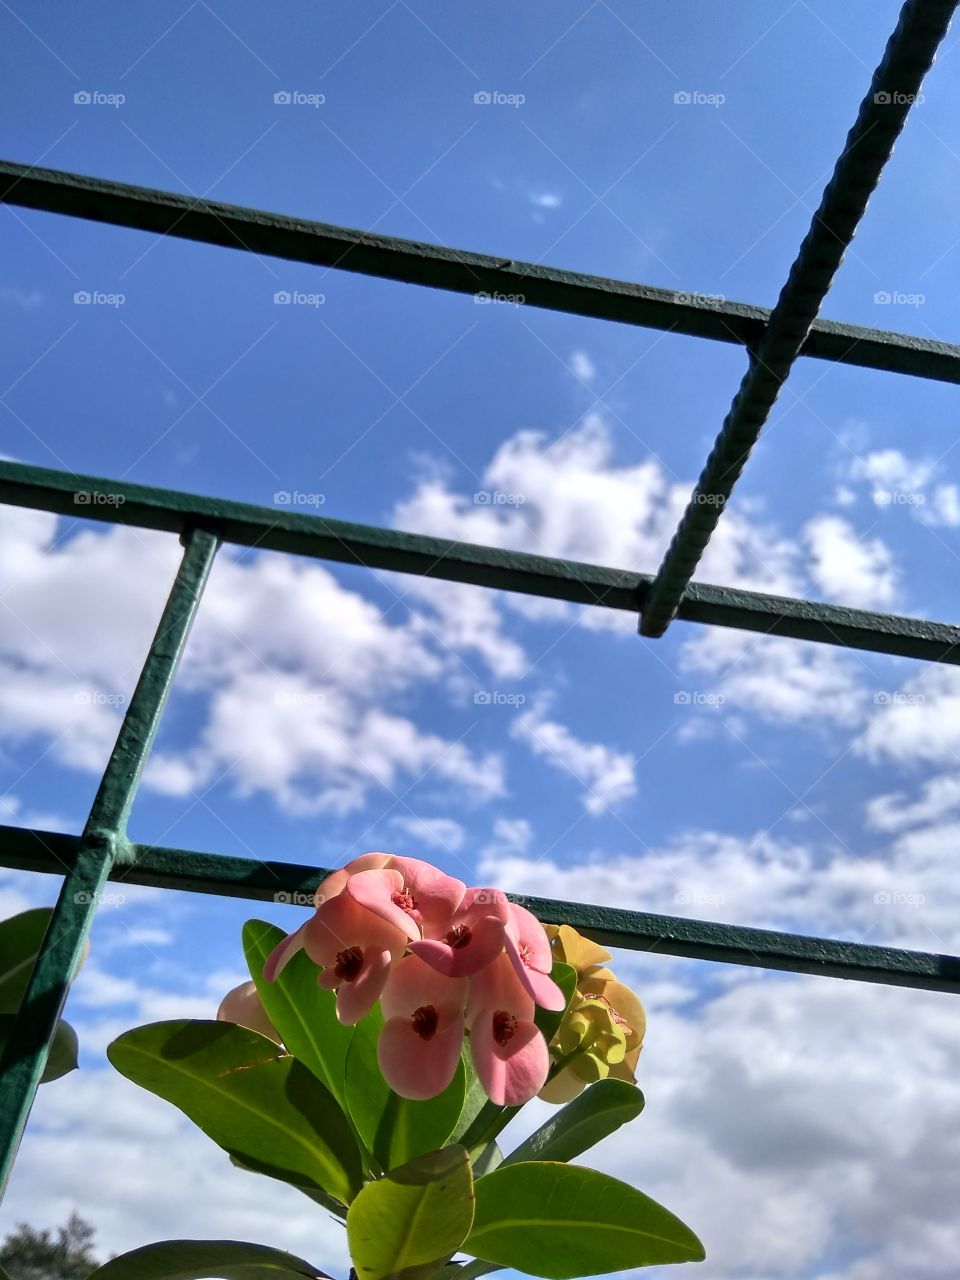 Flowers and sky with lines from the fence. It's a peaceful view. It's a calm morning.